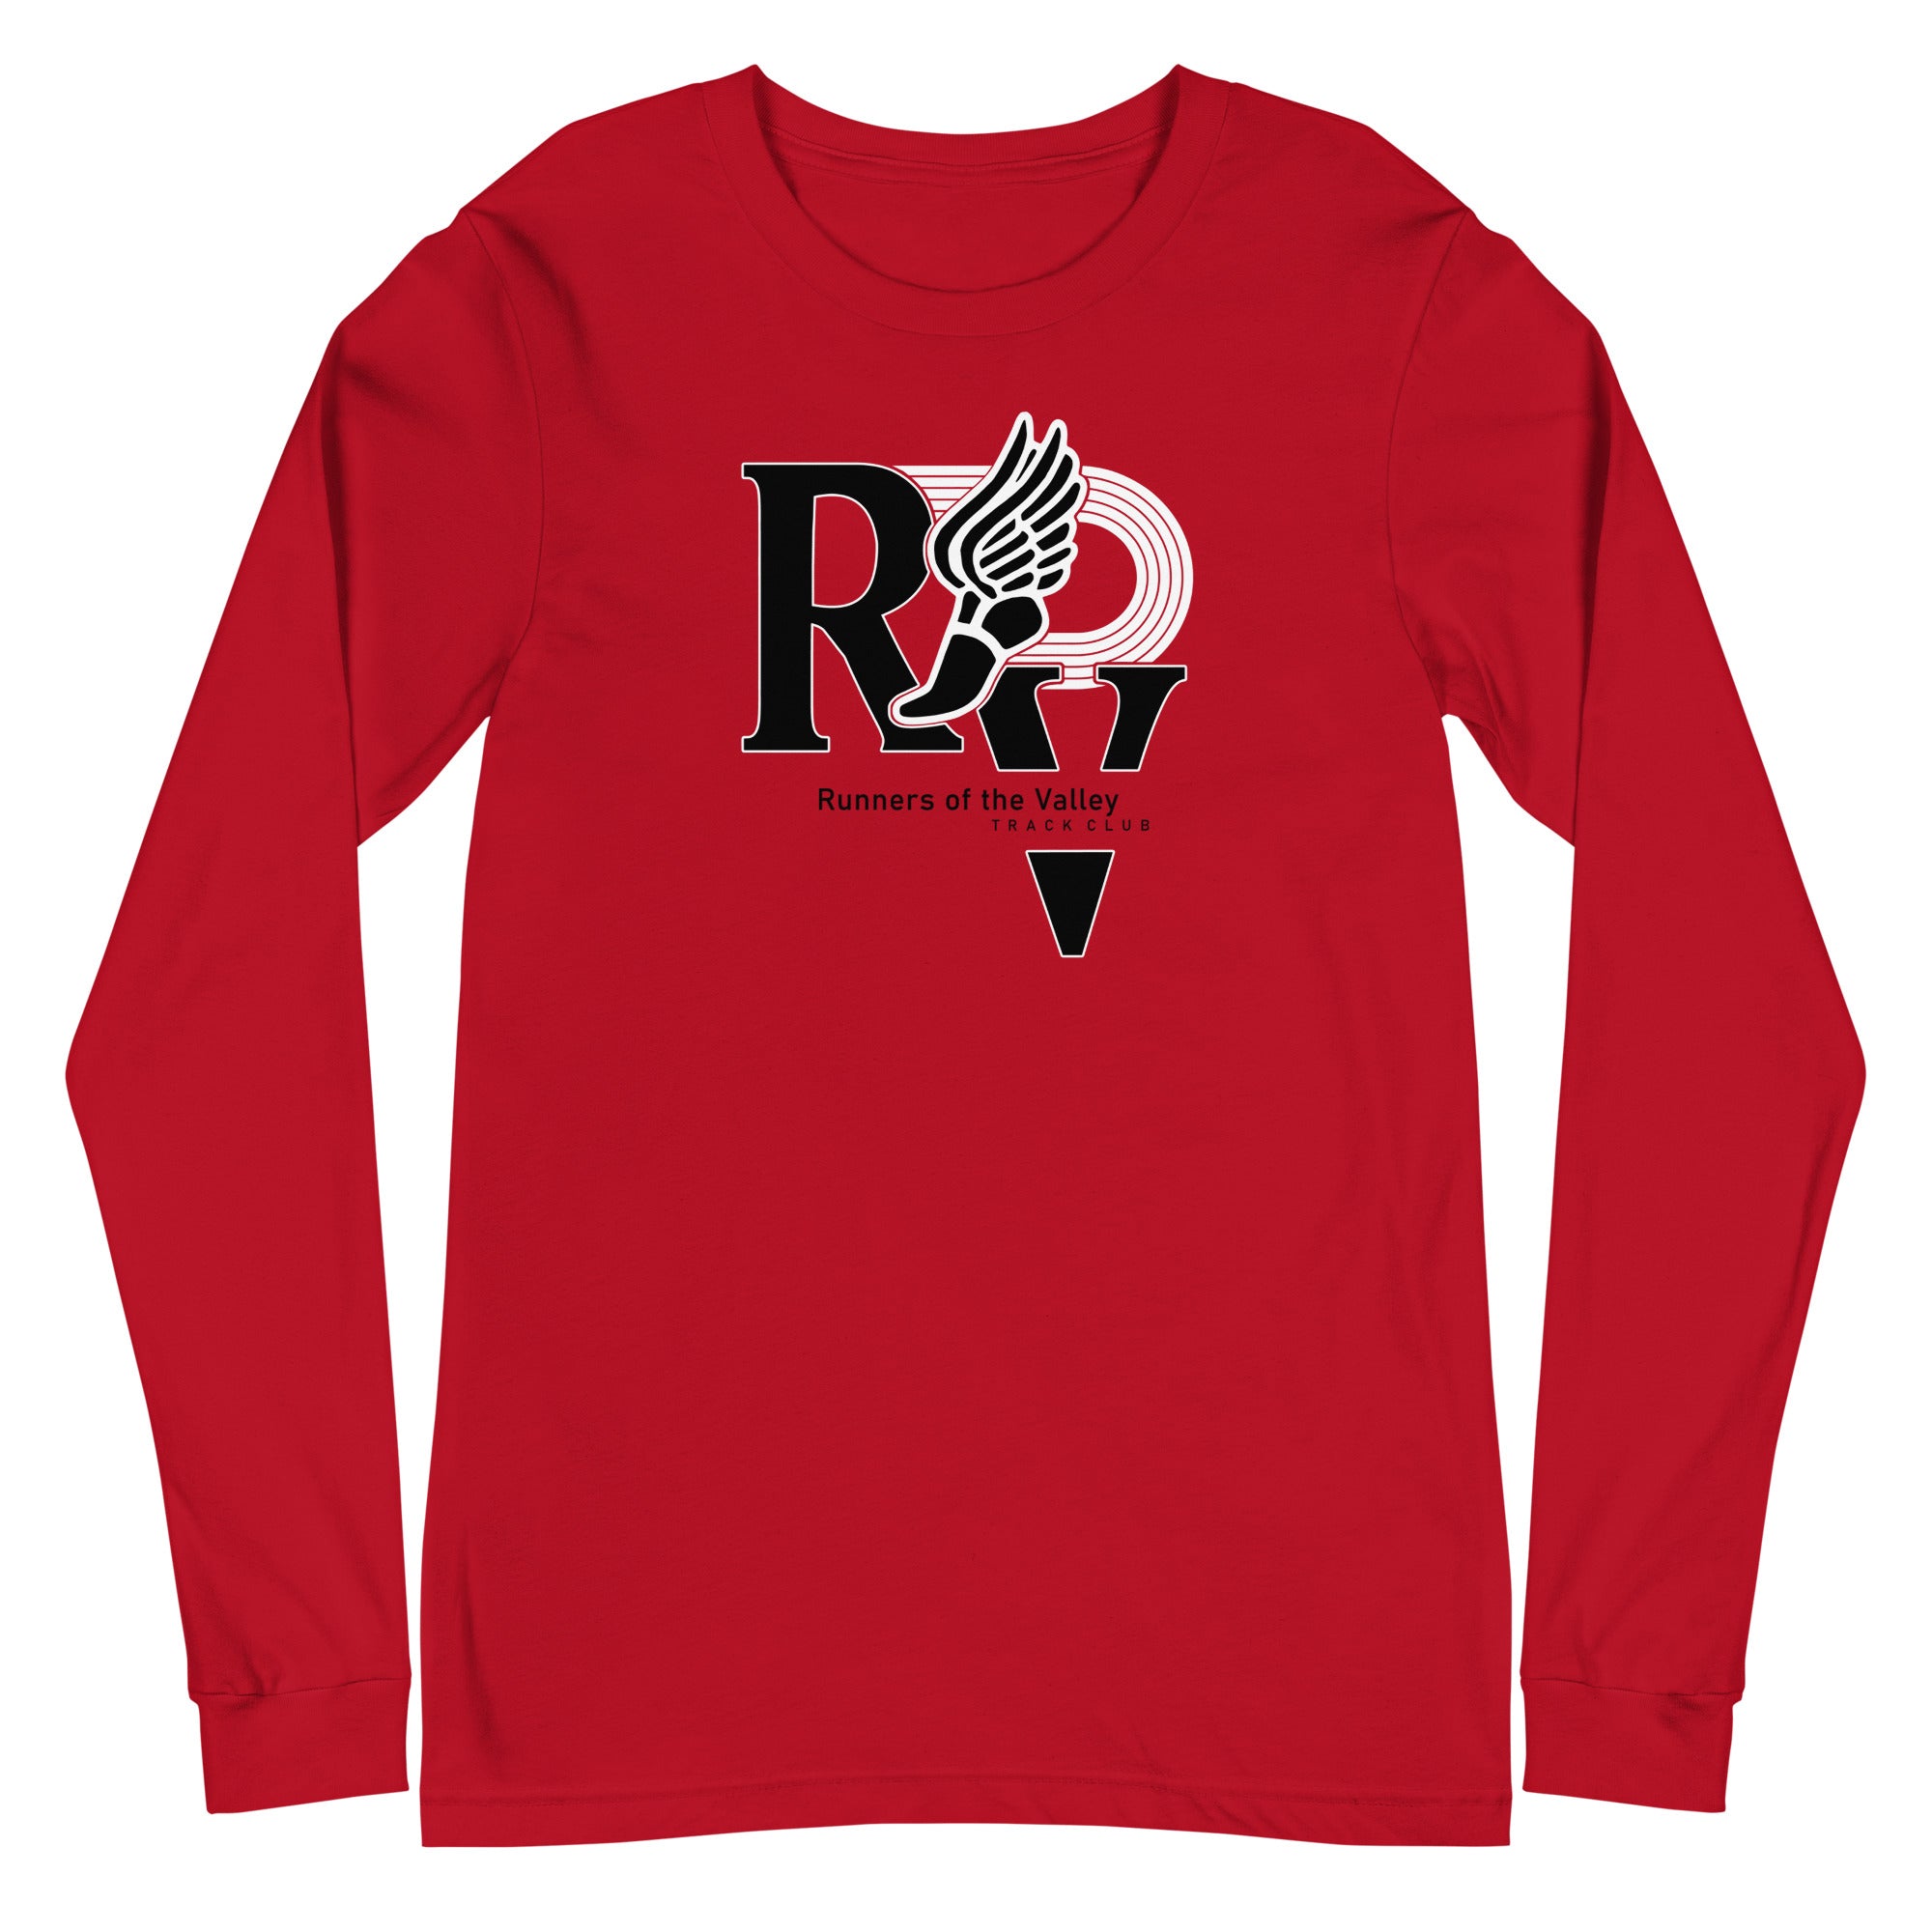 Runners of the Valley Red Unisex Long Sleeve Tee